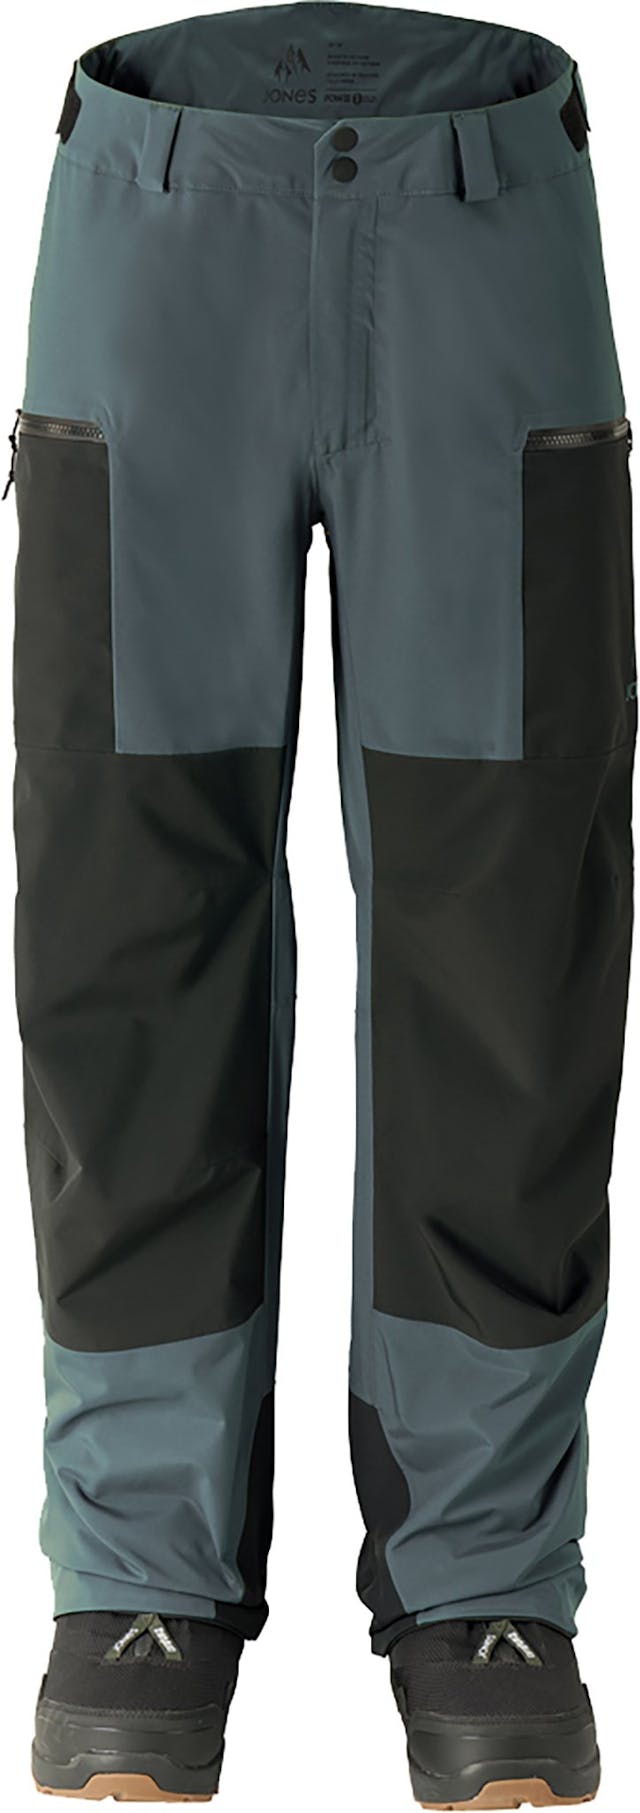 Product image for MTN Surf Recycled Pant - Men's